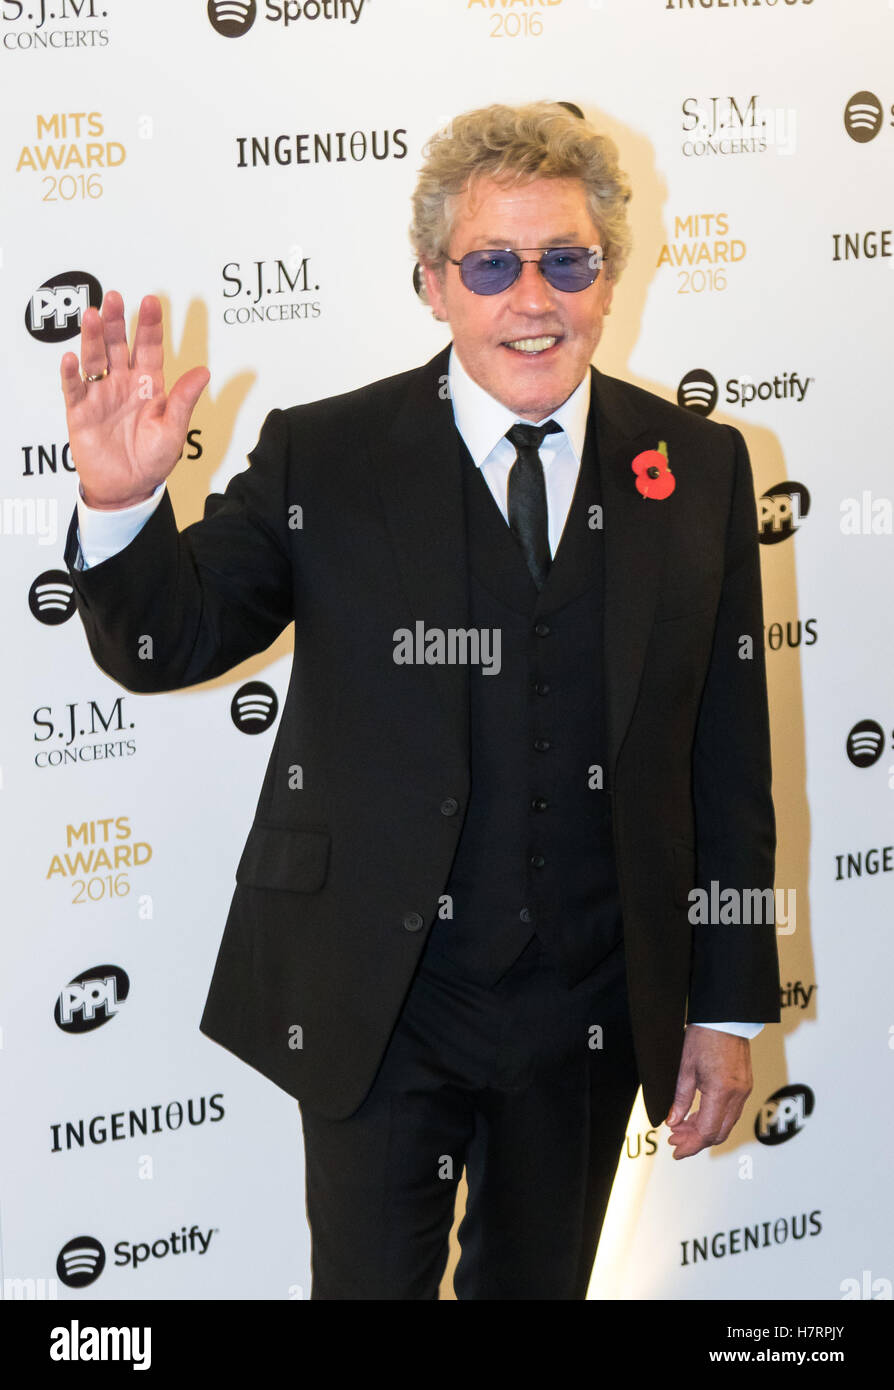 Grosvenor House Hotel, London, November 7th 2016. Luminaries from the music industry gather at the Grosvenor House Hotel for the Music Industry Awards, where this year The Who's Roger Daltrey CBE is honored with the 25th annual MITS award in support of Nordoff Robbins and The BRIT Trust. PICTURED: Roger Daltrey Credit:  Paul Davey/Alamy Live News Stock Photo